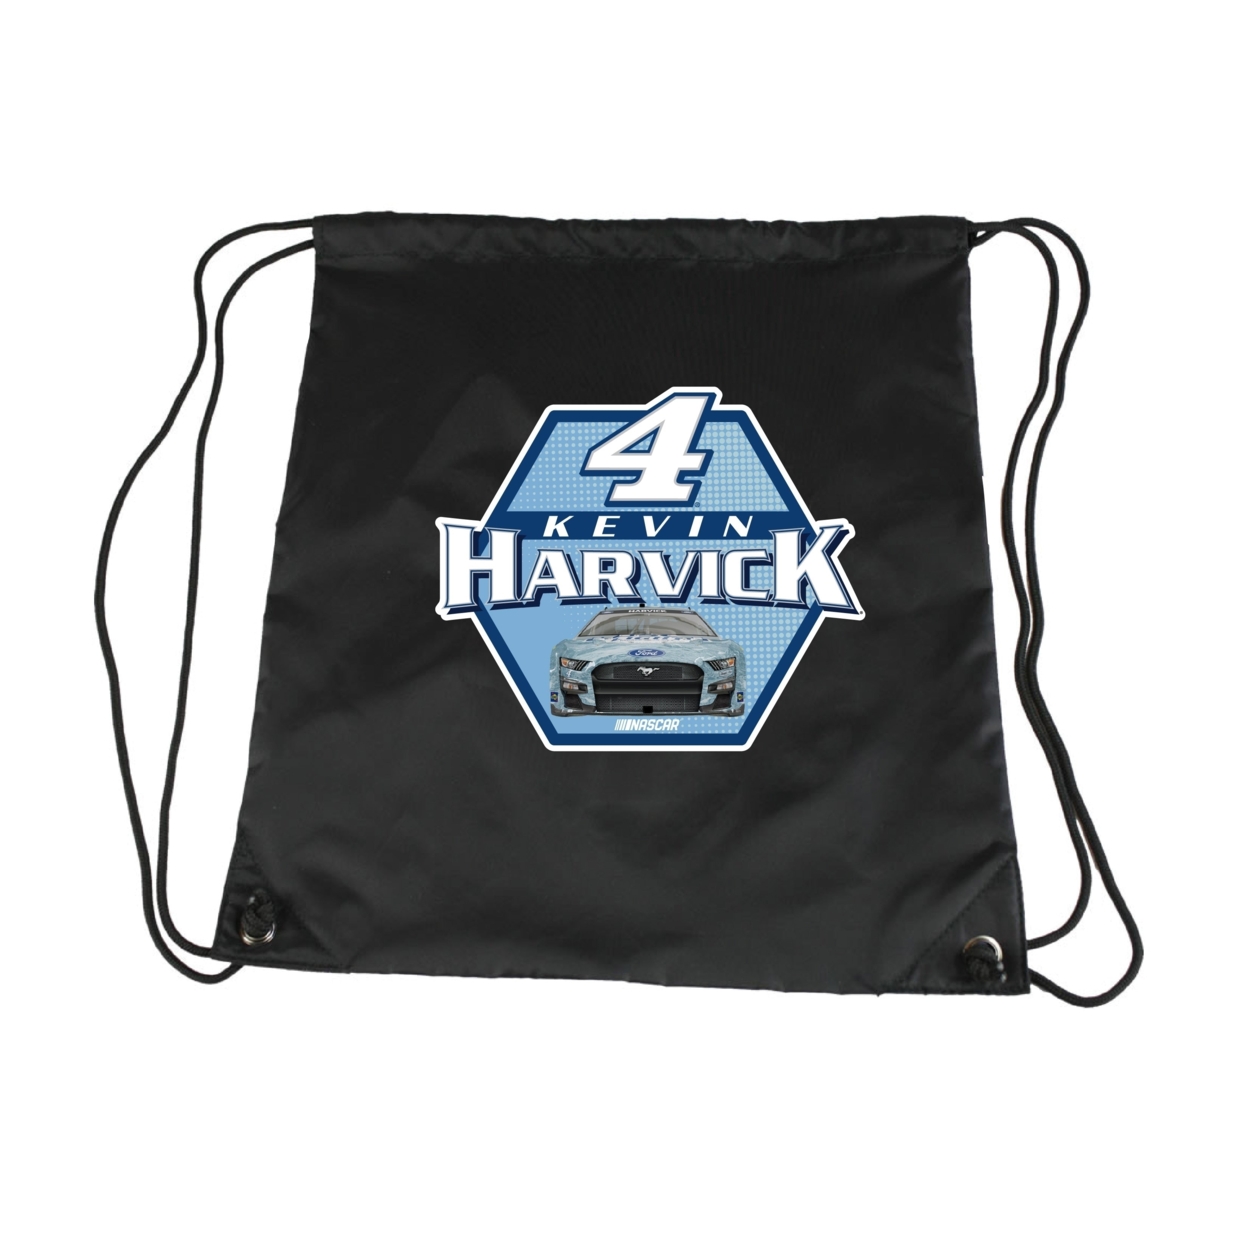 R and R Imports 4 Kevin Harvick Officially Licensed Nascar Cinch Bag with Drawstring